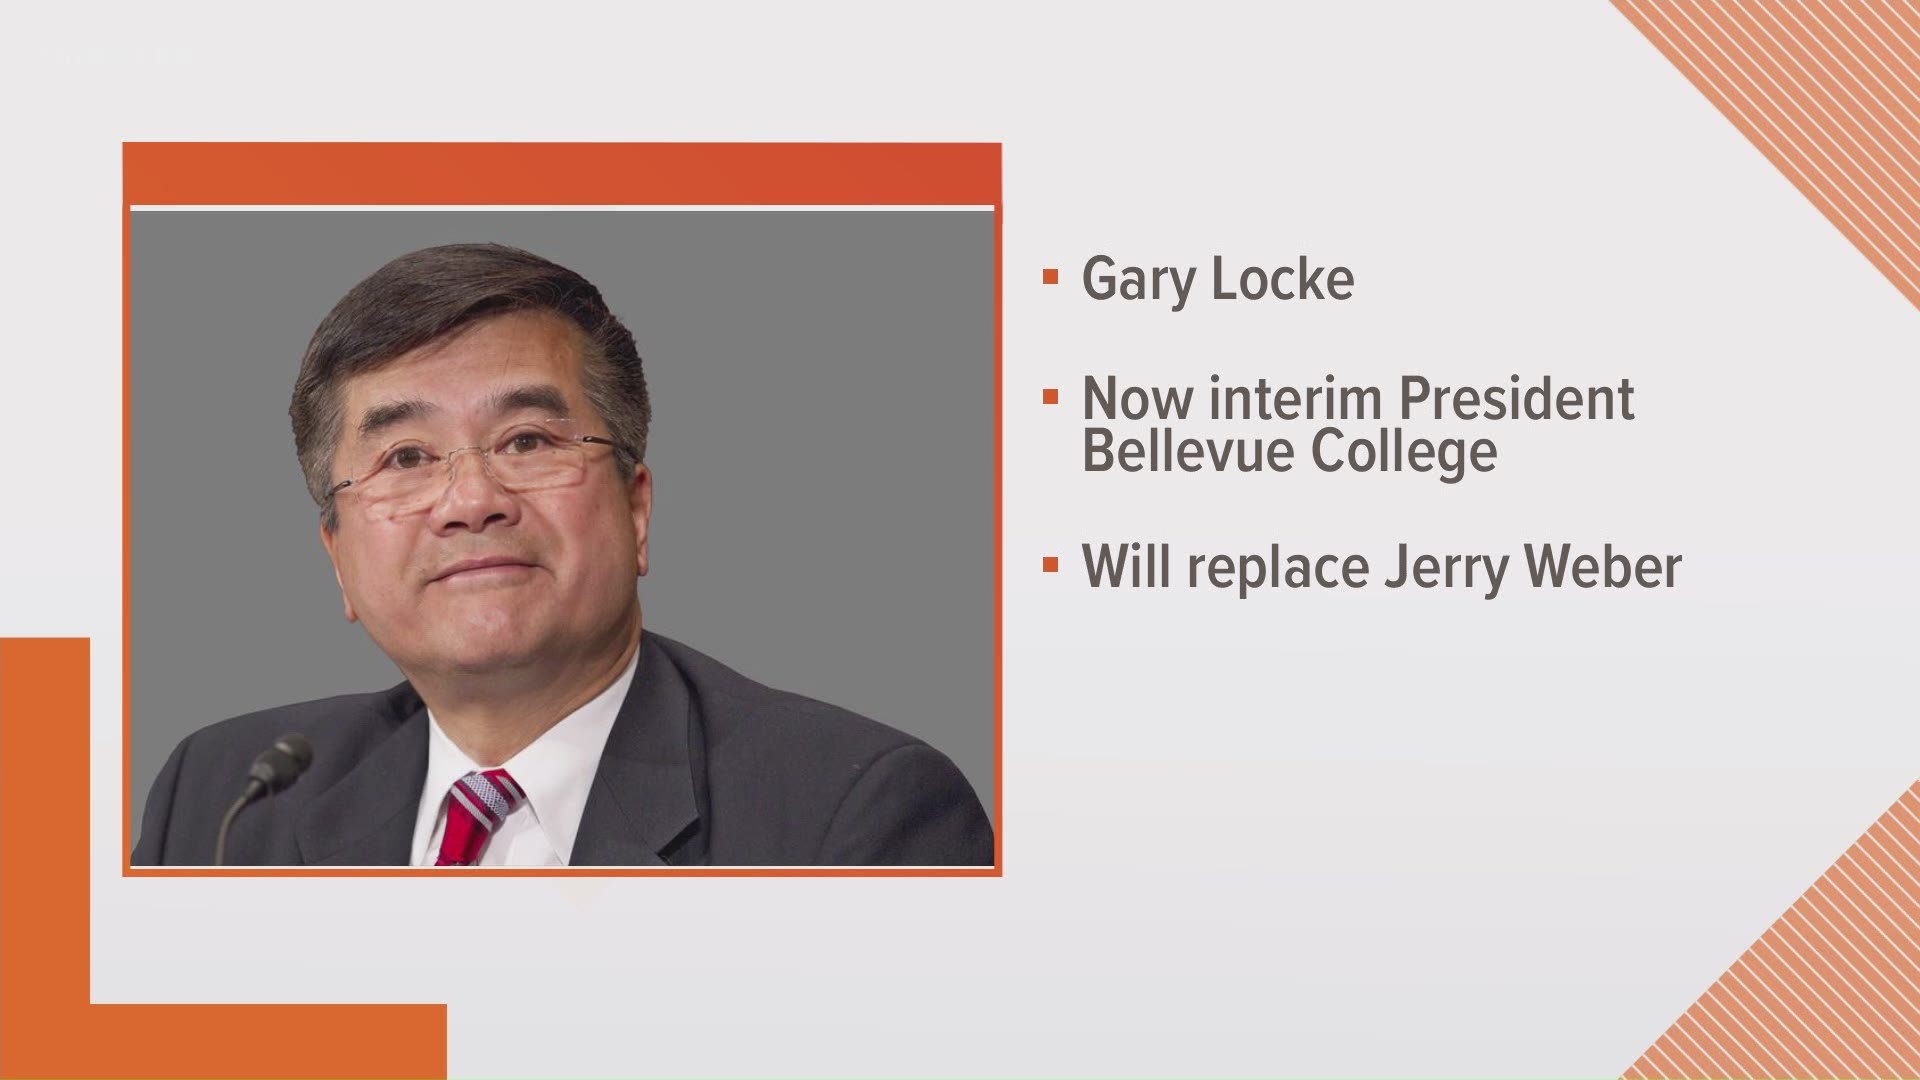 The former governor and ambassador to China will replace Jerry Weber as the interim president of the college.